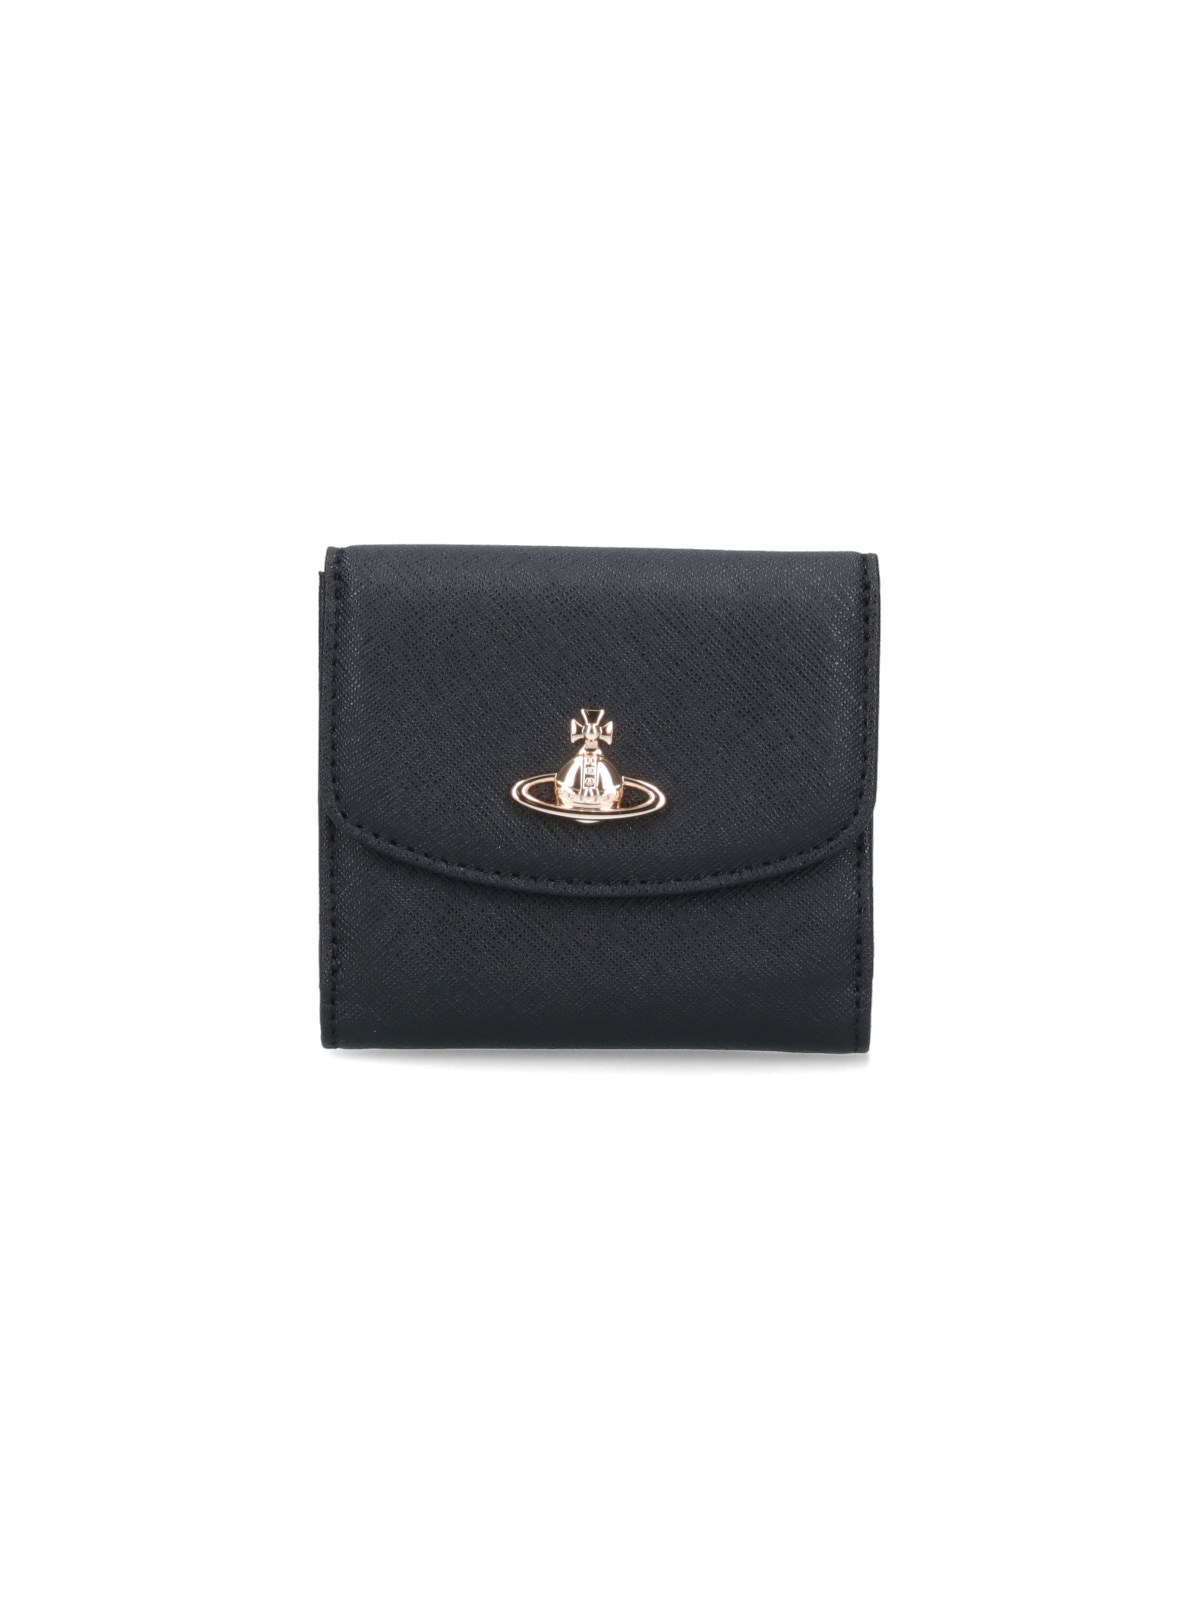 Vivienne Westwood Saffiano Small Wallet In Black